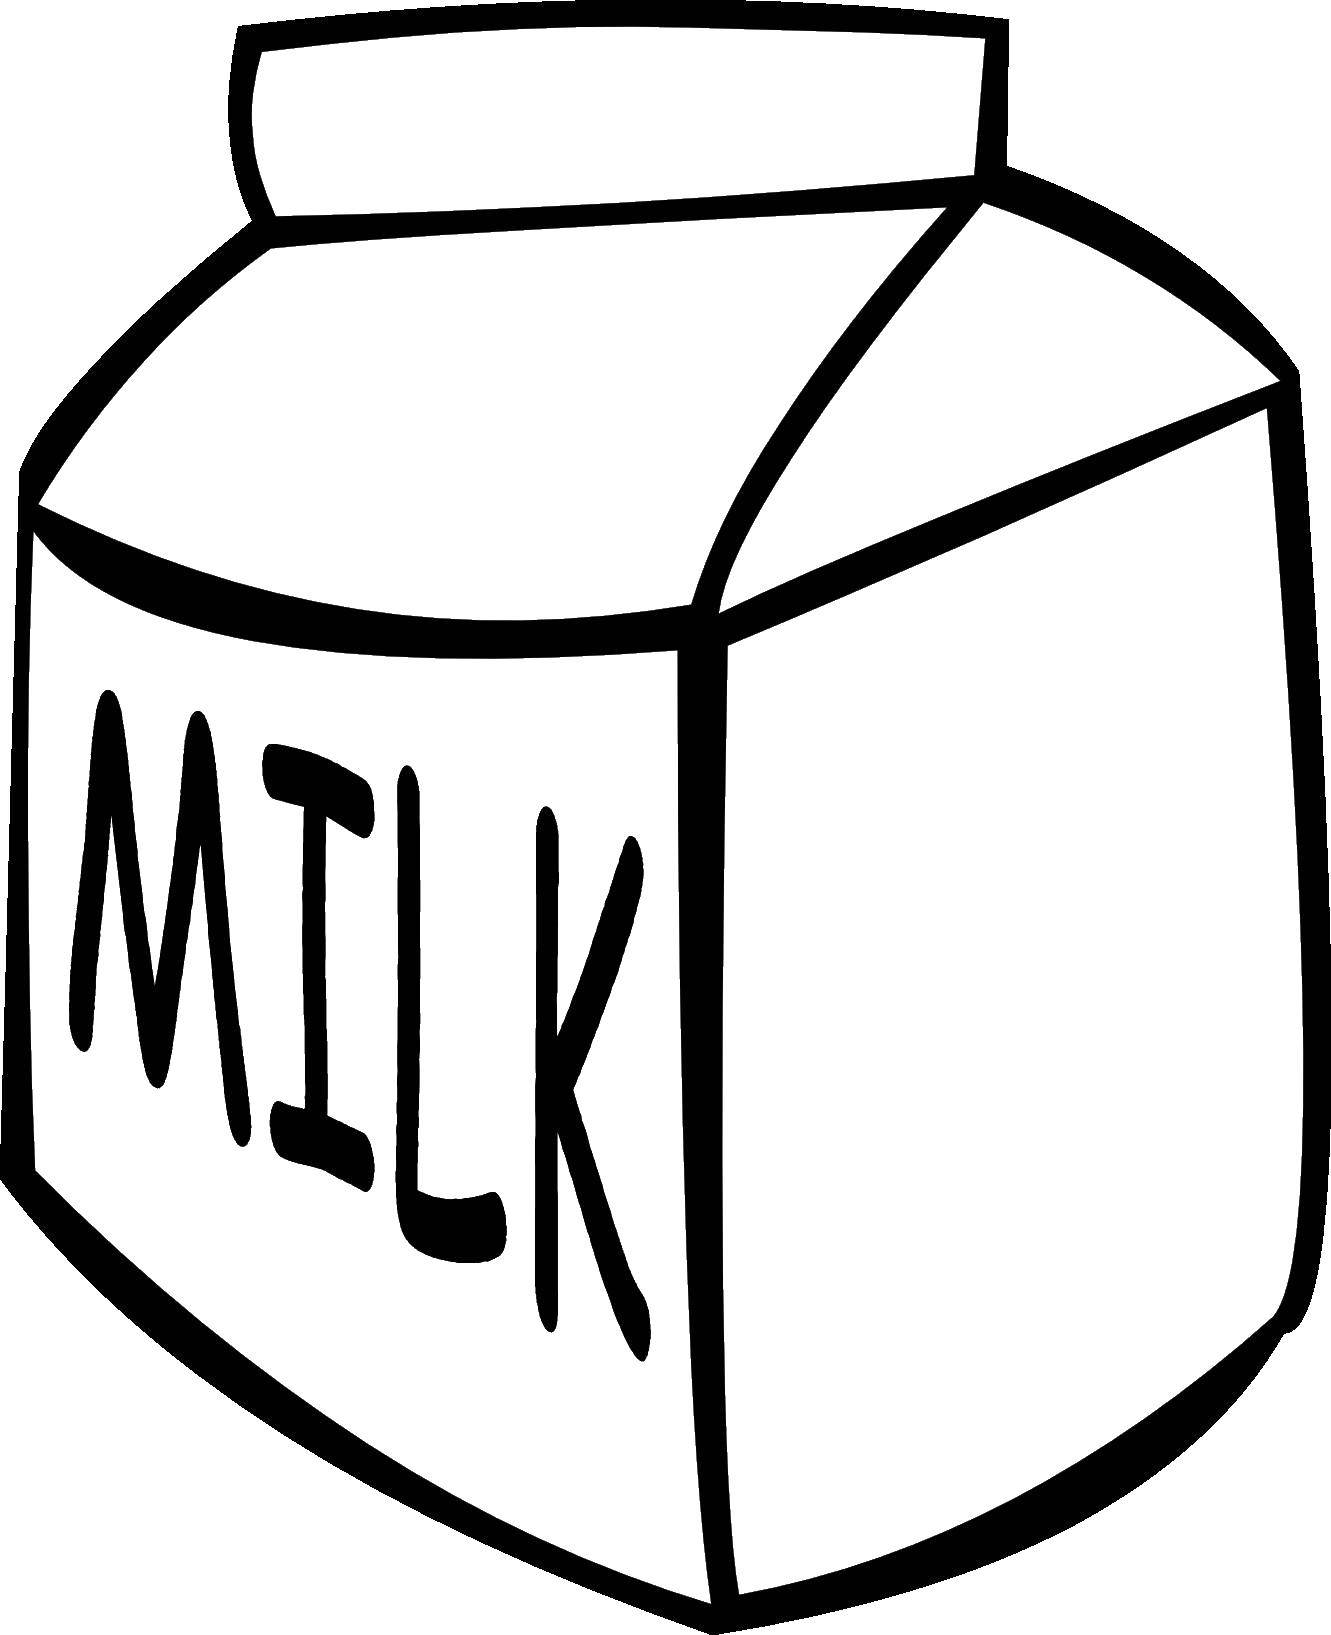 Coloring The package with milk. Category Milk. Tags:  milk, package.